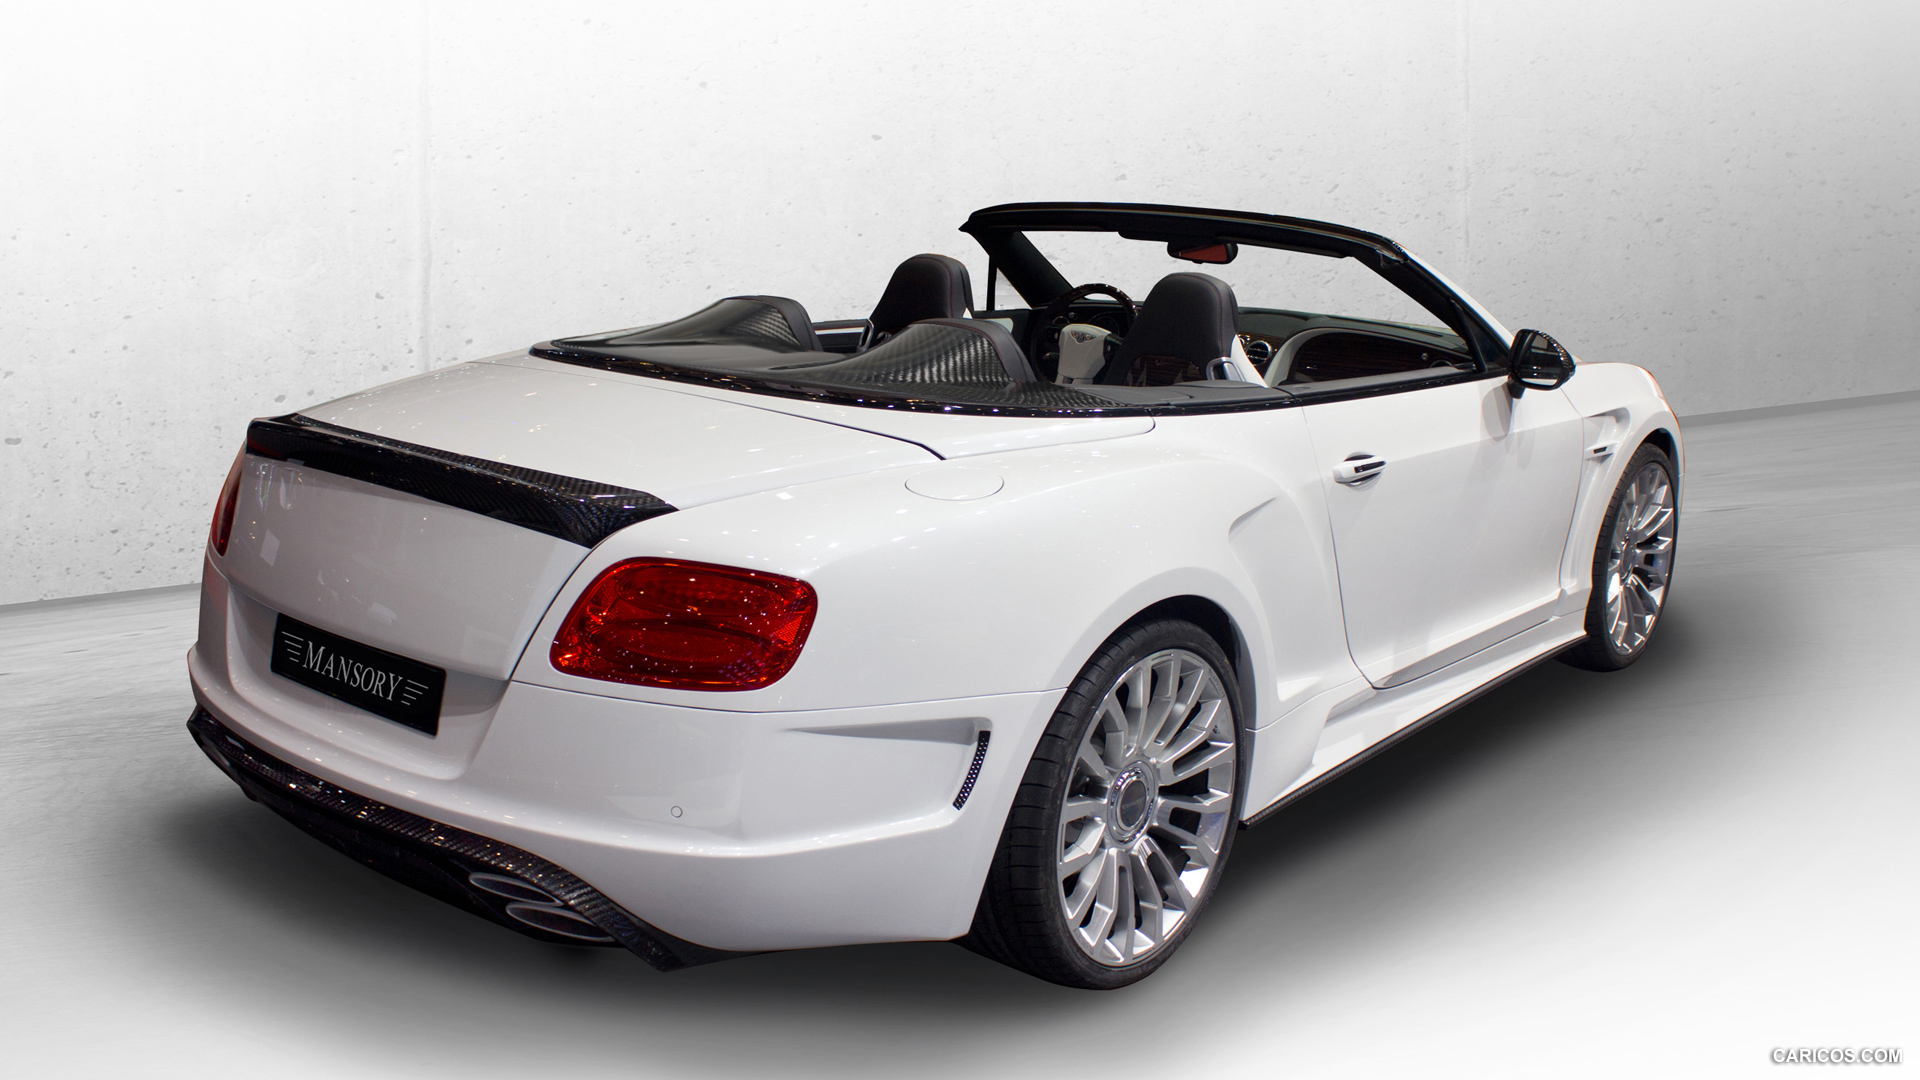 2012 Mansory Bentley Continental GTC LE MANSORY II  - Rear, #8 of 13